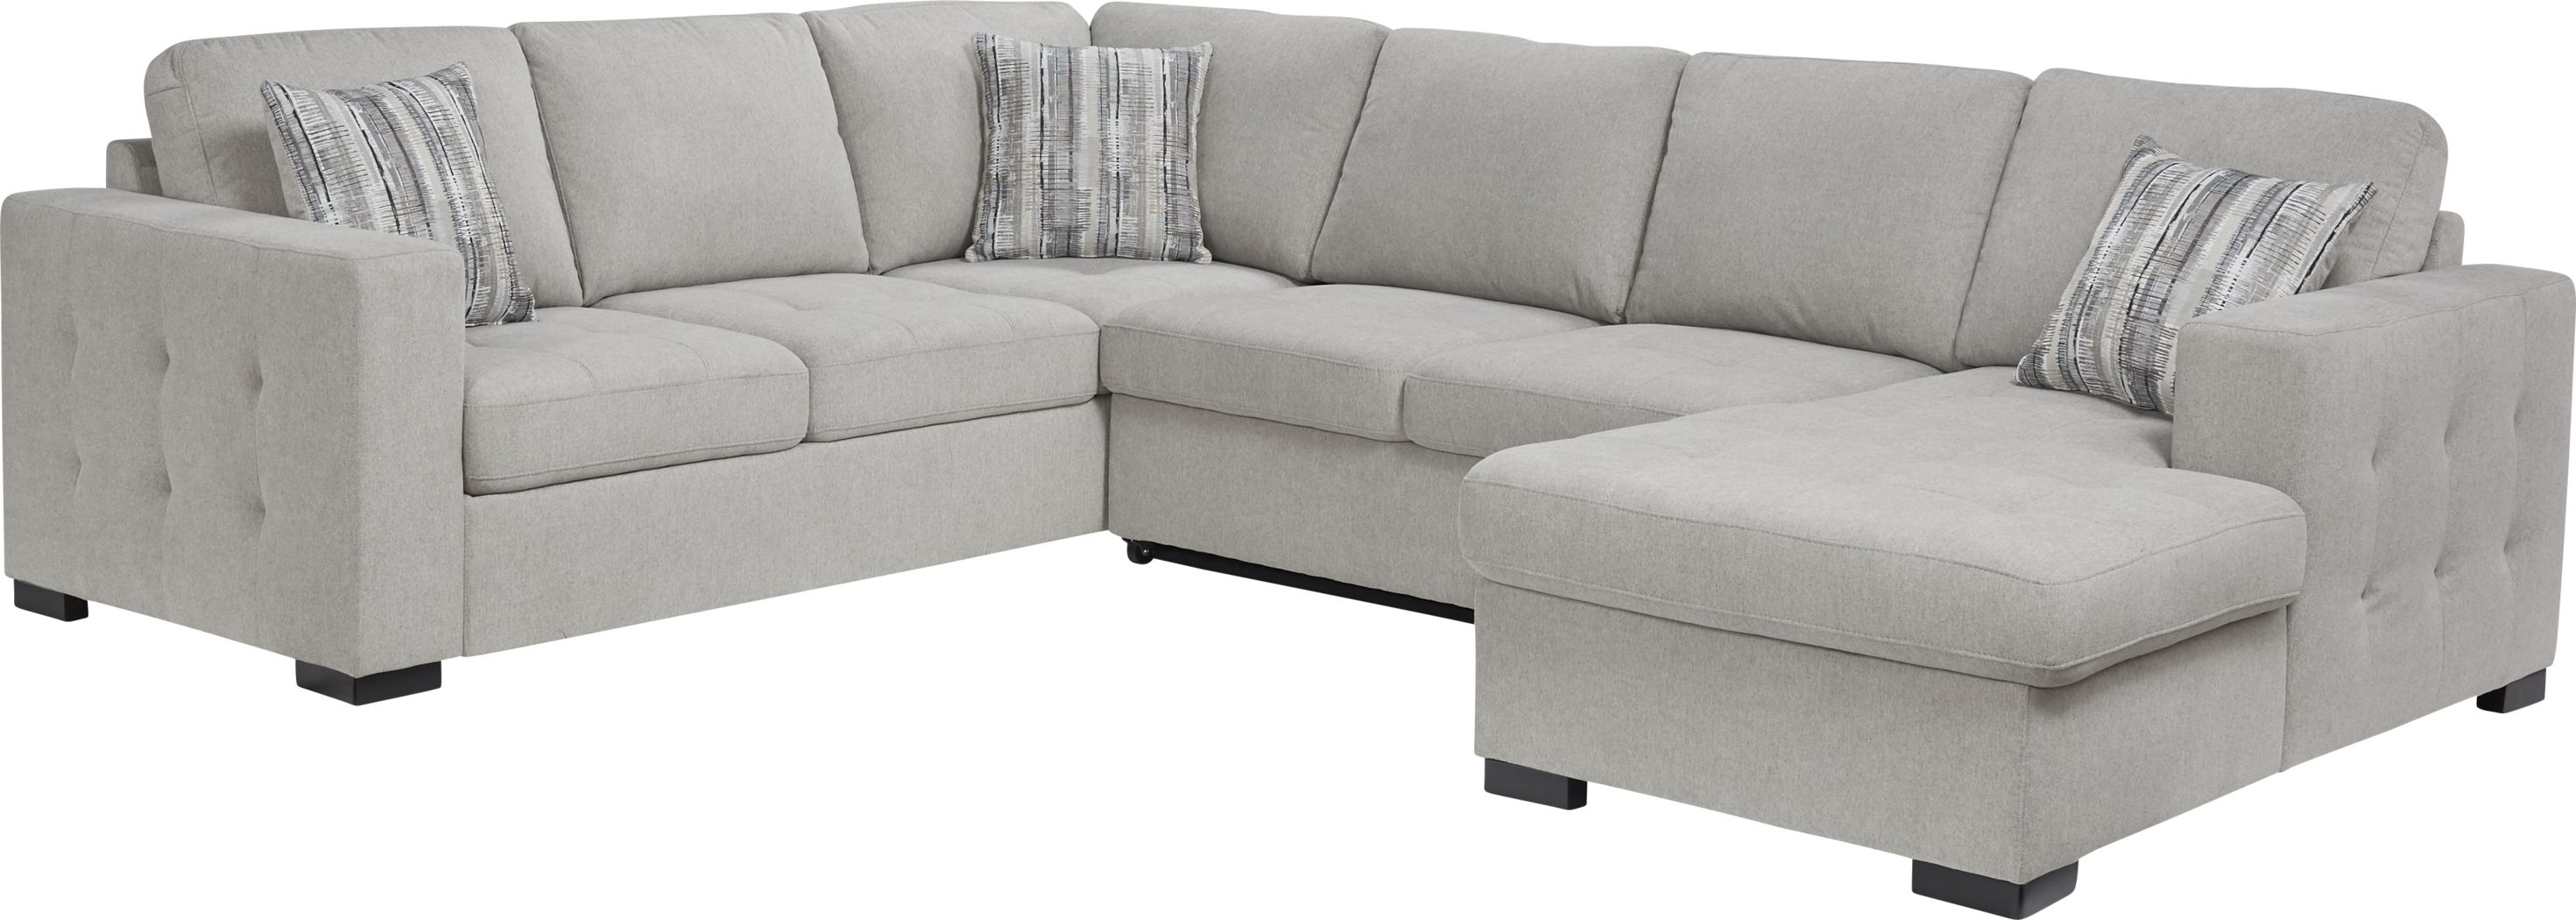 Featured image of post Angelino Heights 3 Piece Sectional Canada Find sectional sofas at crate and barrel canada